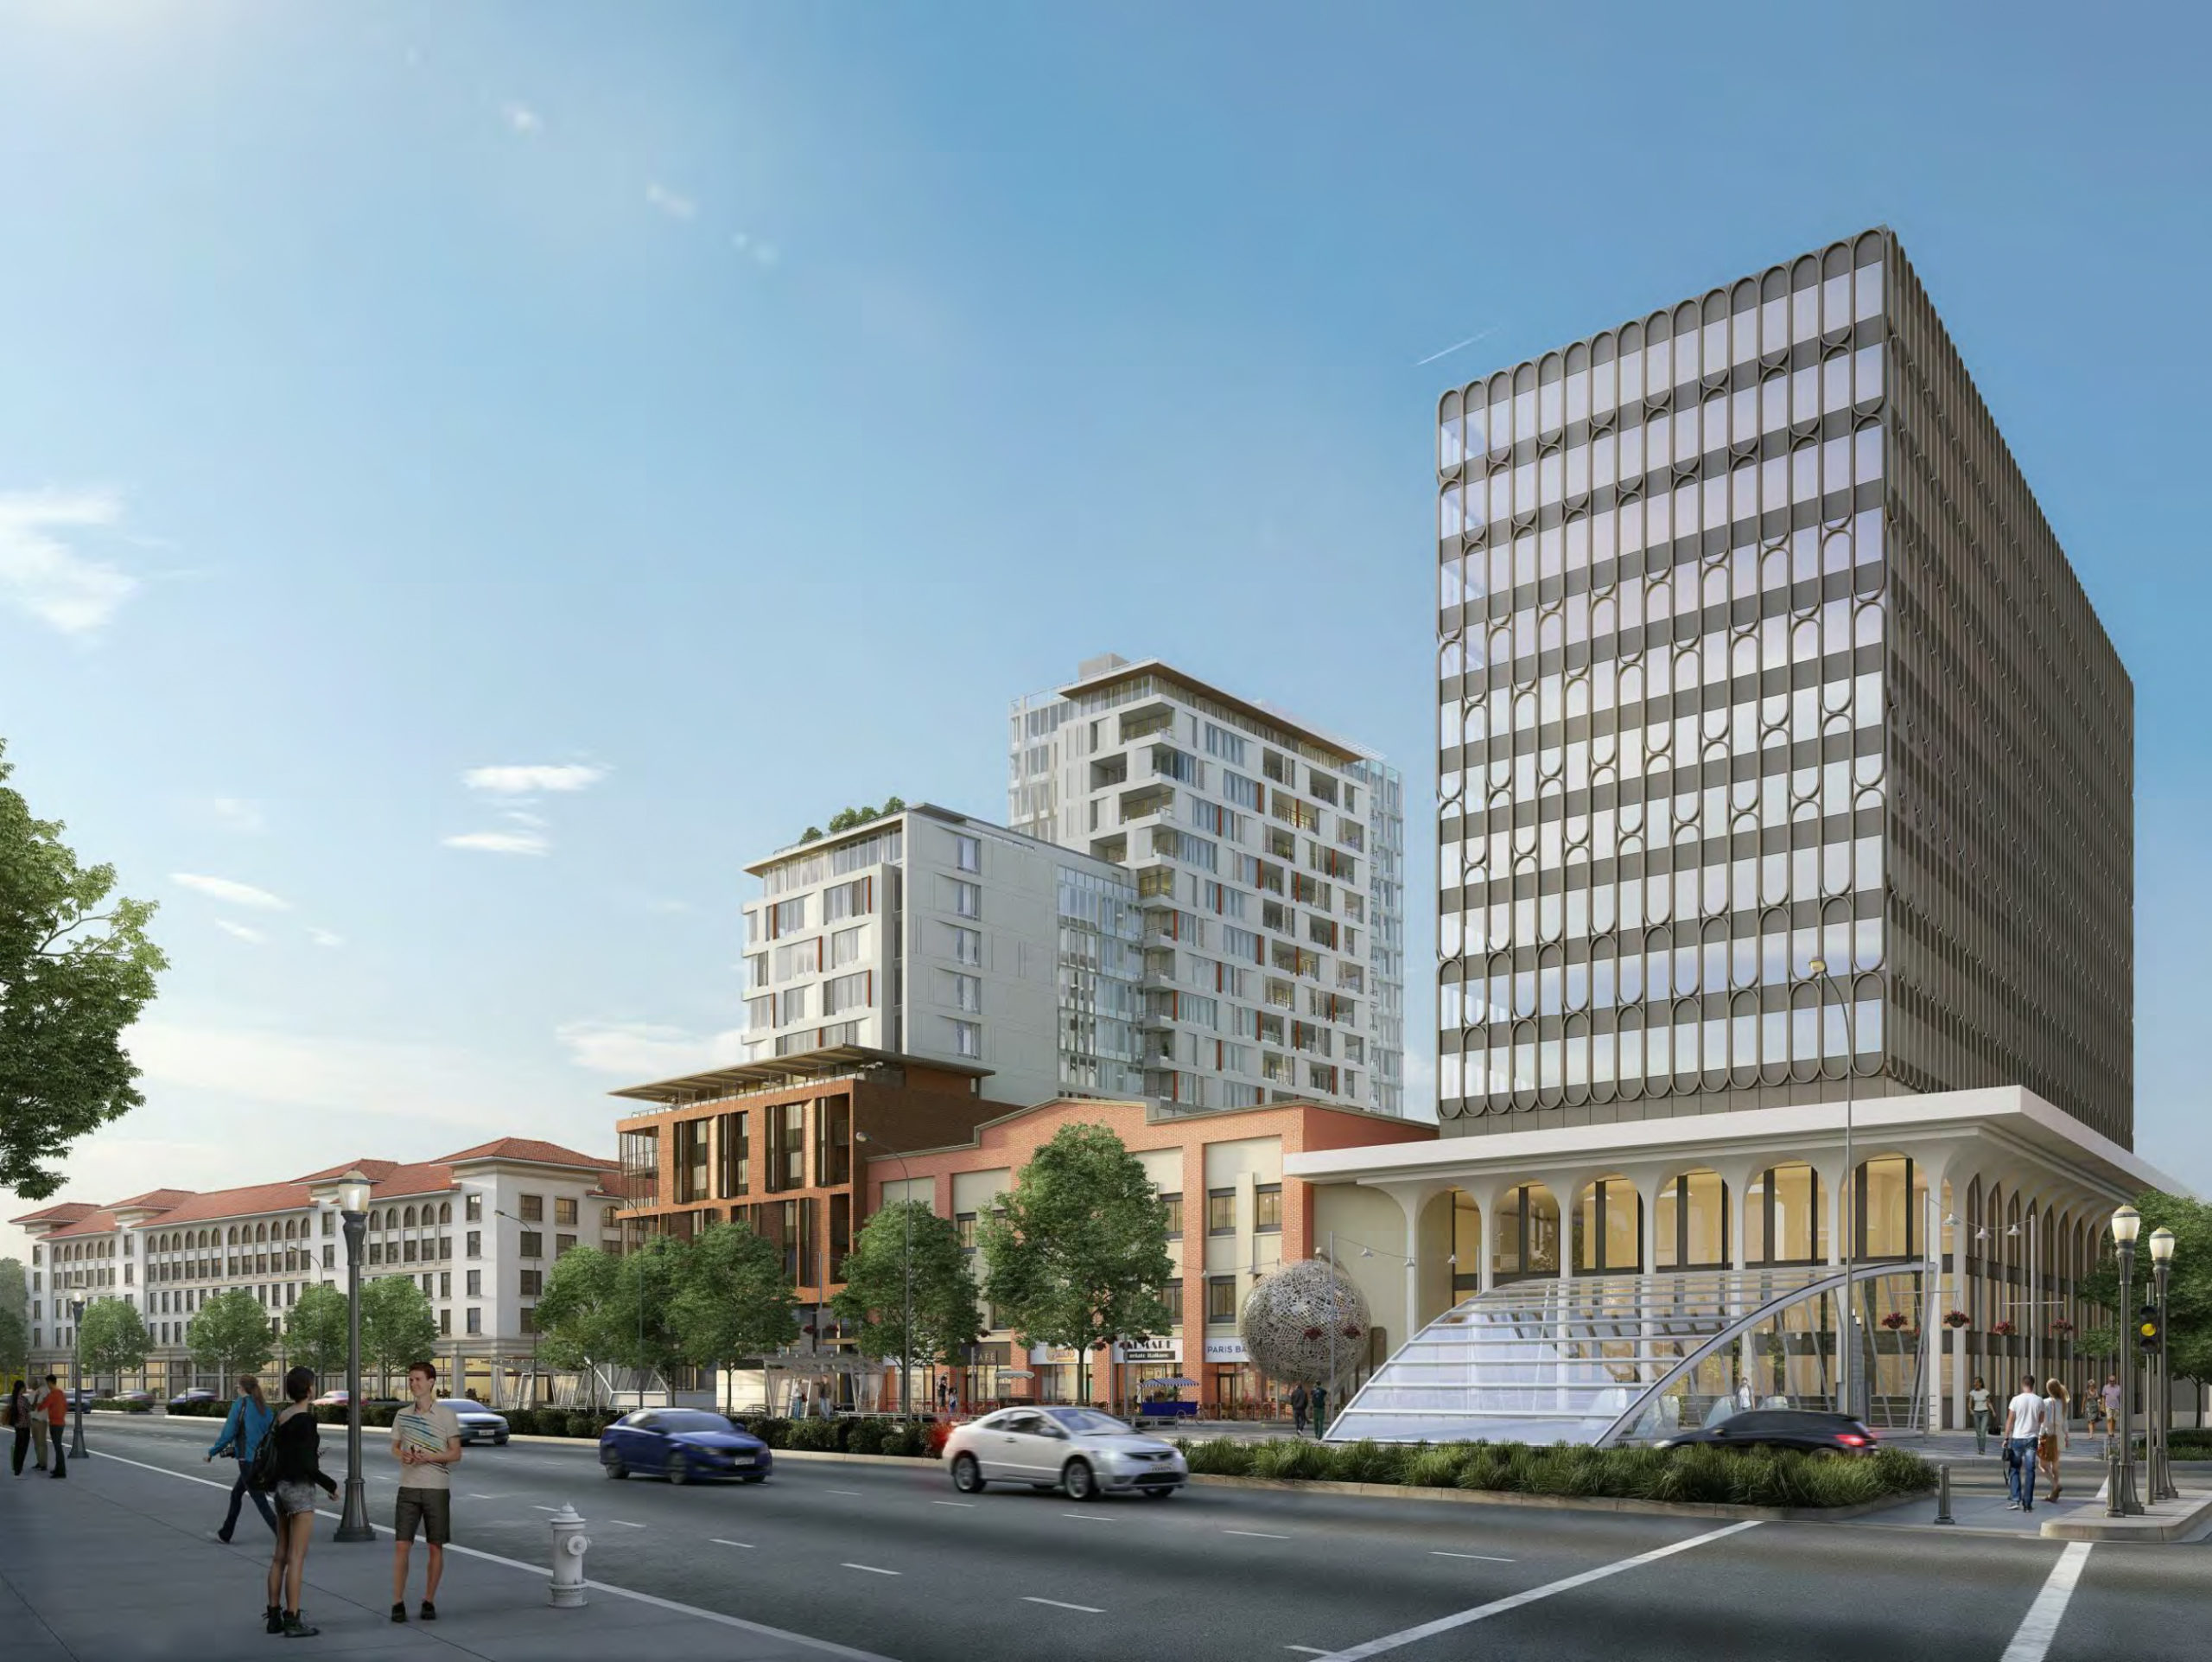 Outdated Shattuck Terrace Green Apartments plan for 2190 Shattuck Avenue next to SkyDeck, the current tallest building in Berkeley, rendering by WRNS Studio